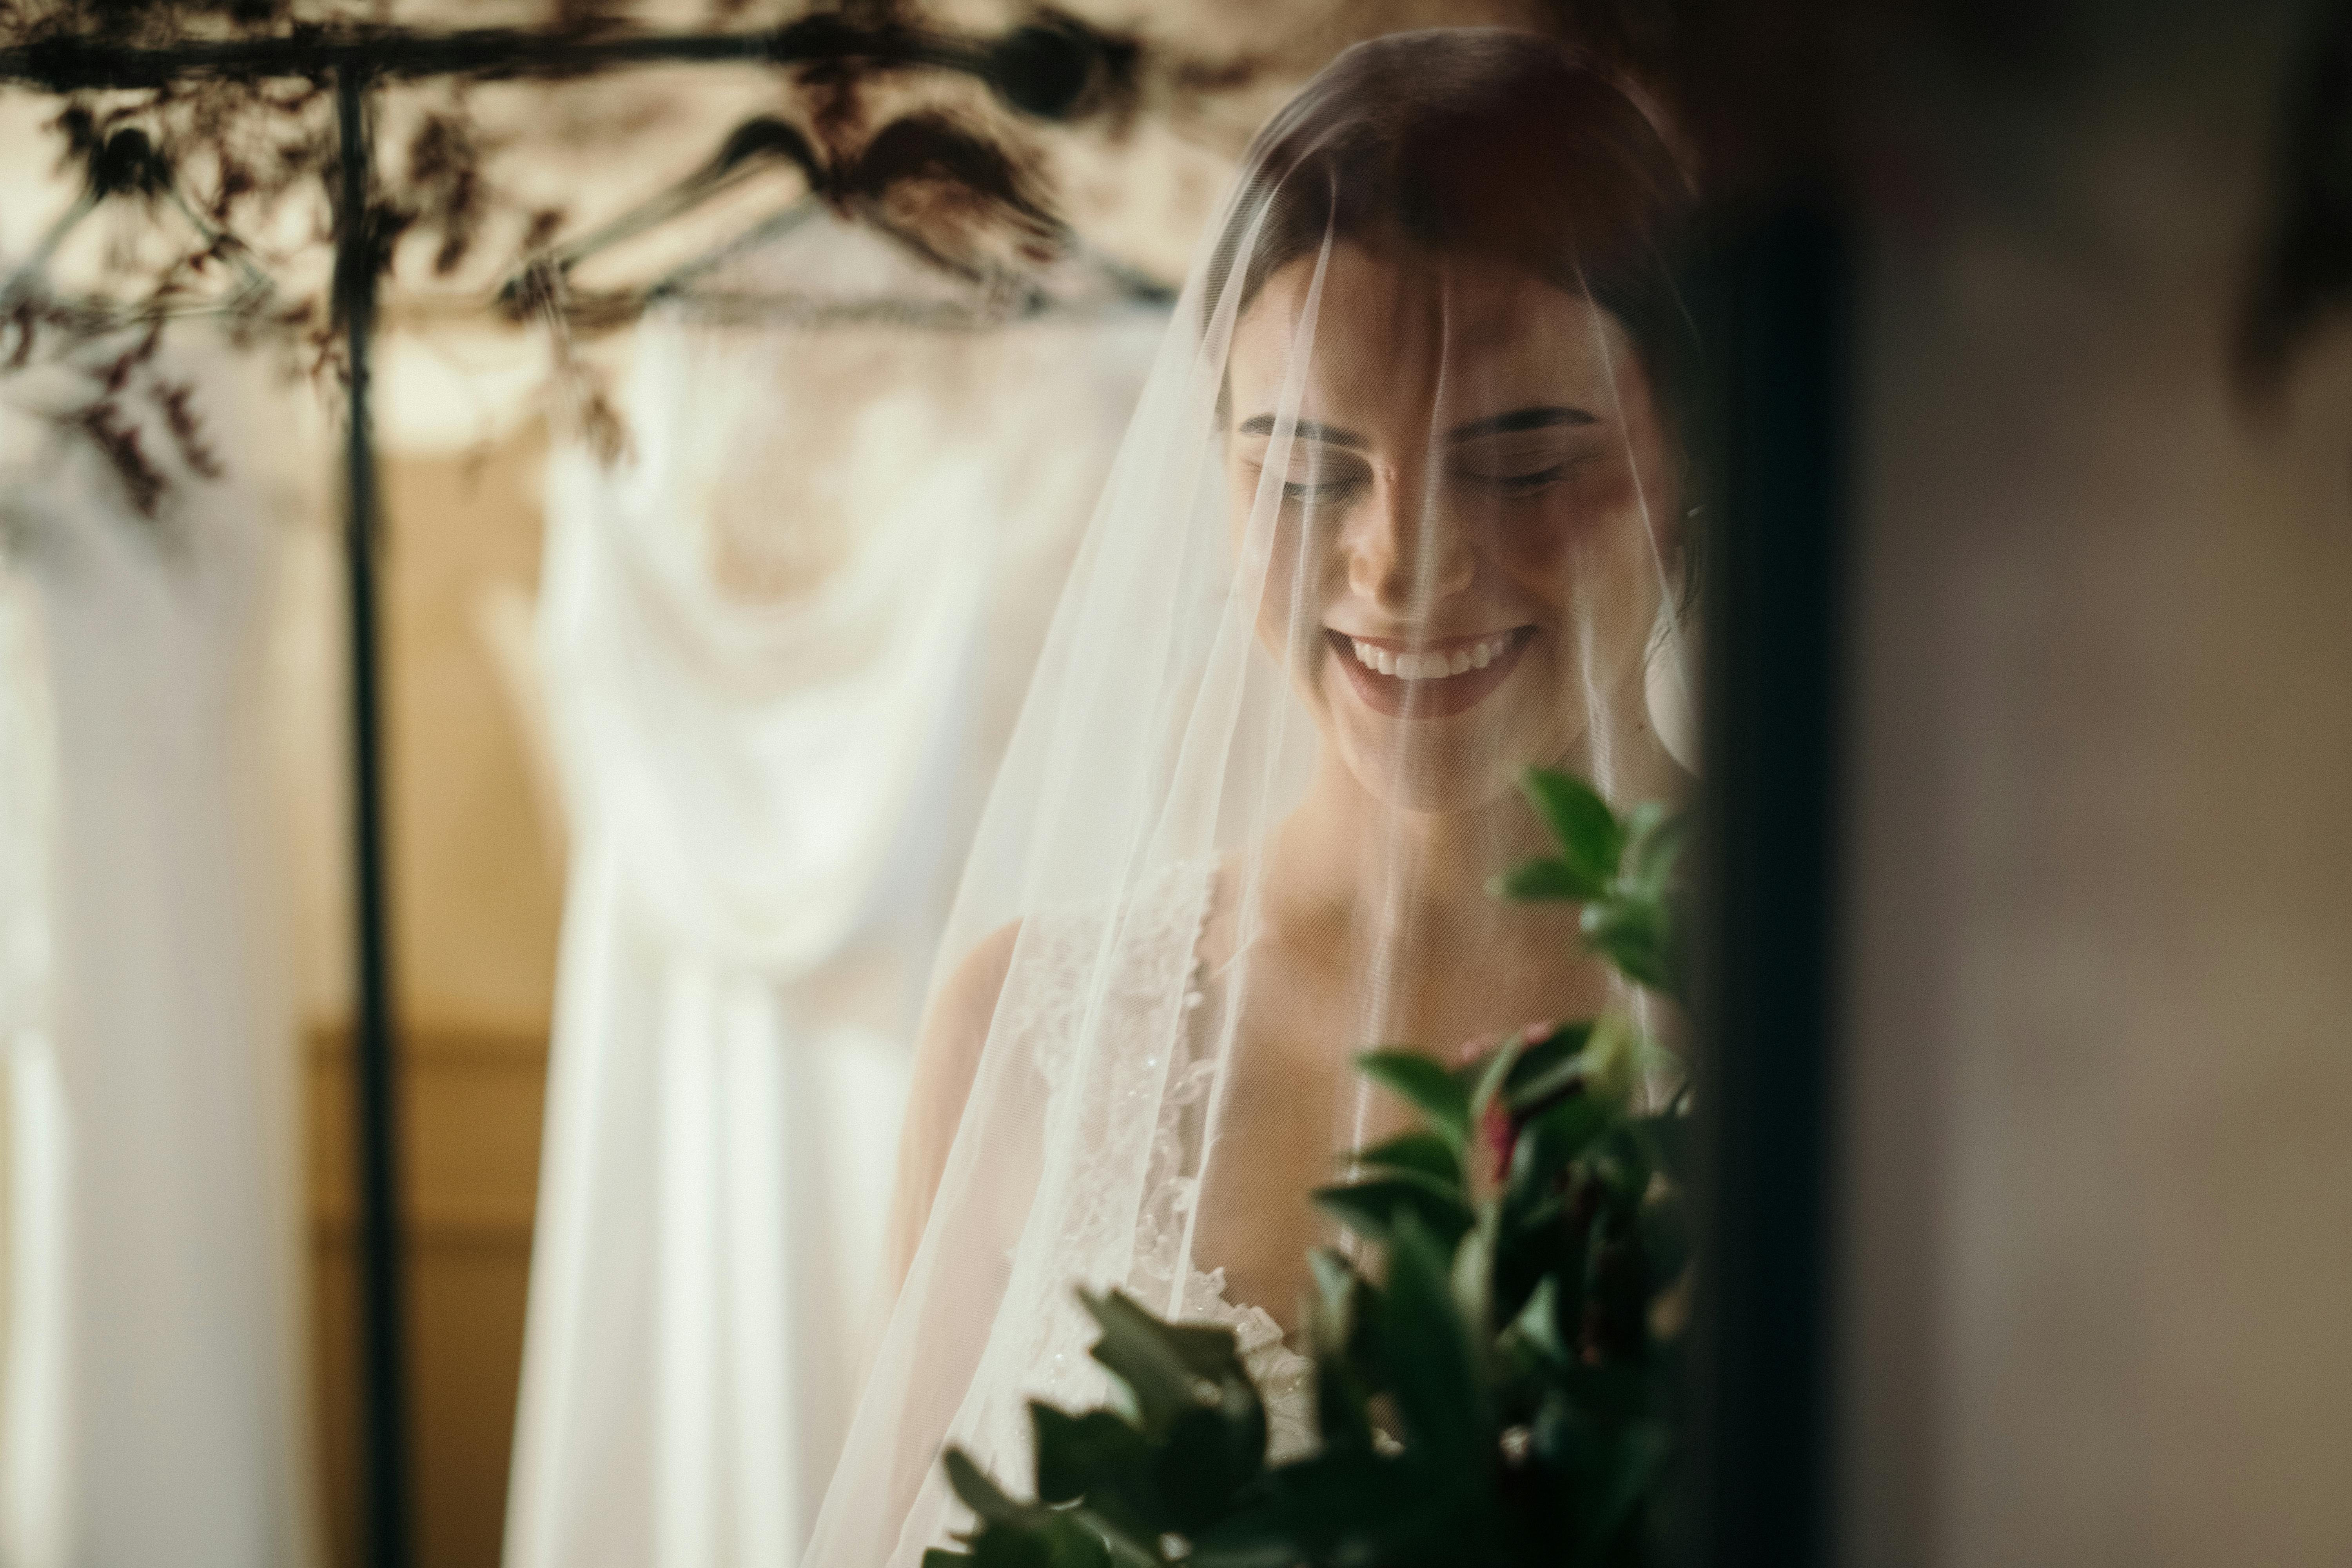 Wedding Photography Advice: How to Feel More Self-Confident in Your Wedding Photos